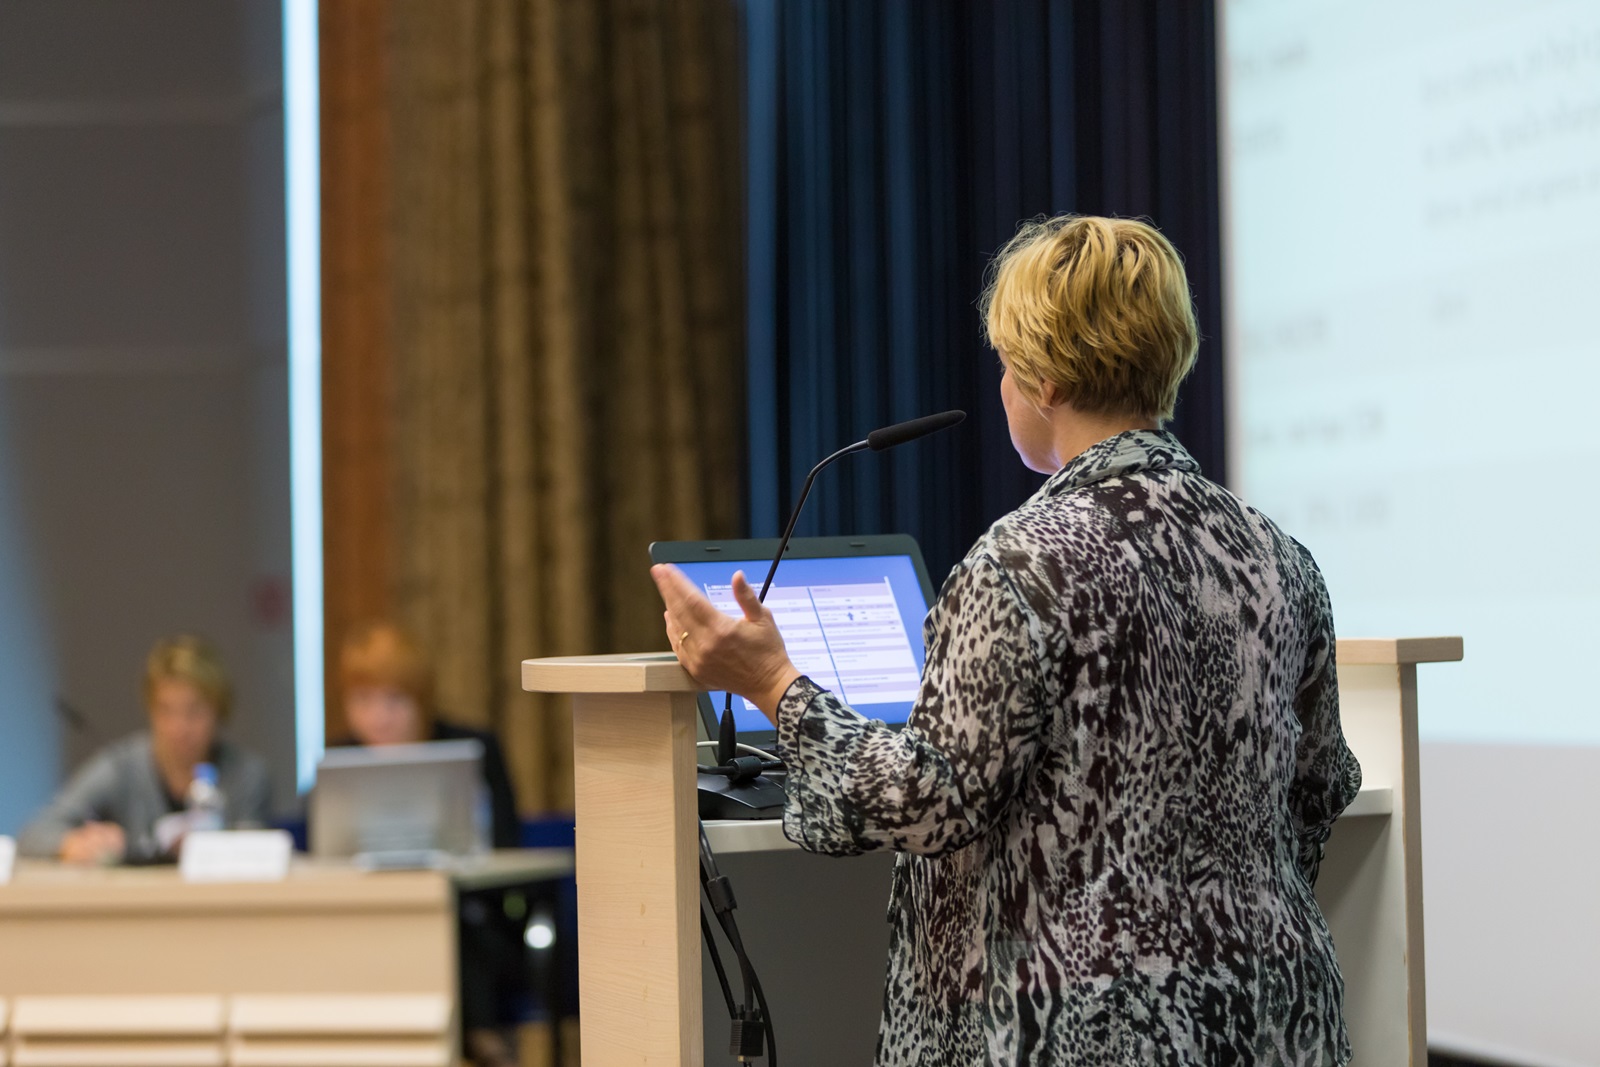 Blond female speaker presents at a scientific conference